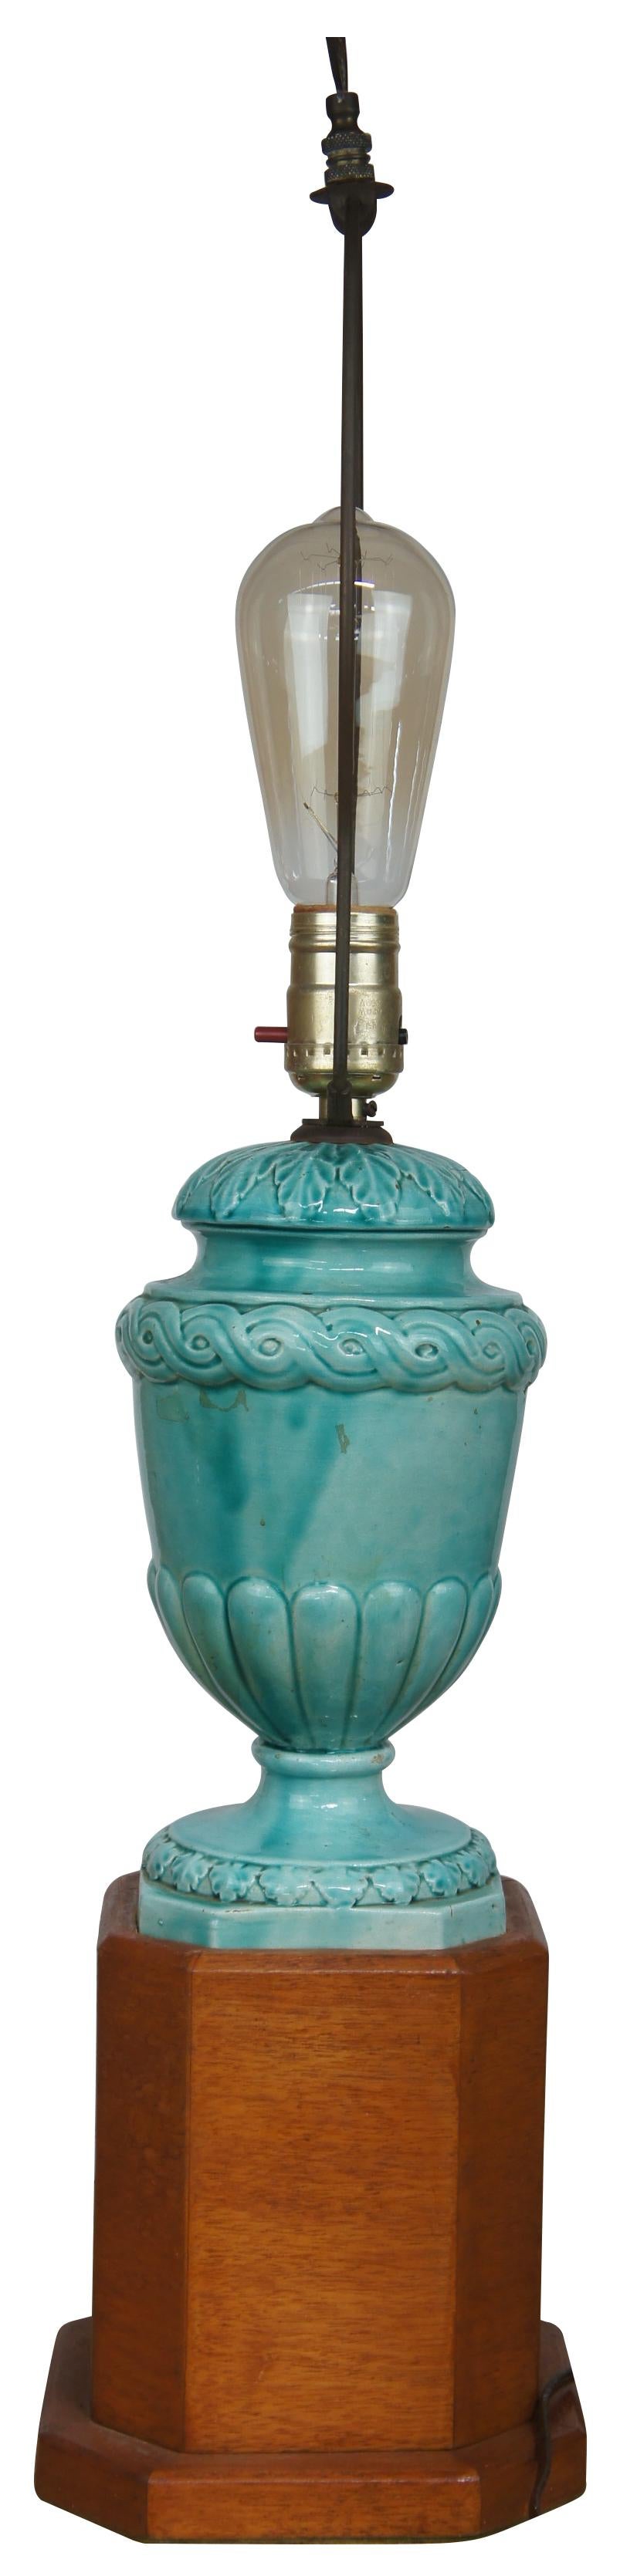 Mid Century Chinese Porcelain Celadon Urn Vase Lamp Stand Chinoiserie Boho Chic In Good Condition For Sale In Dayton, OH